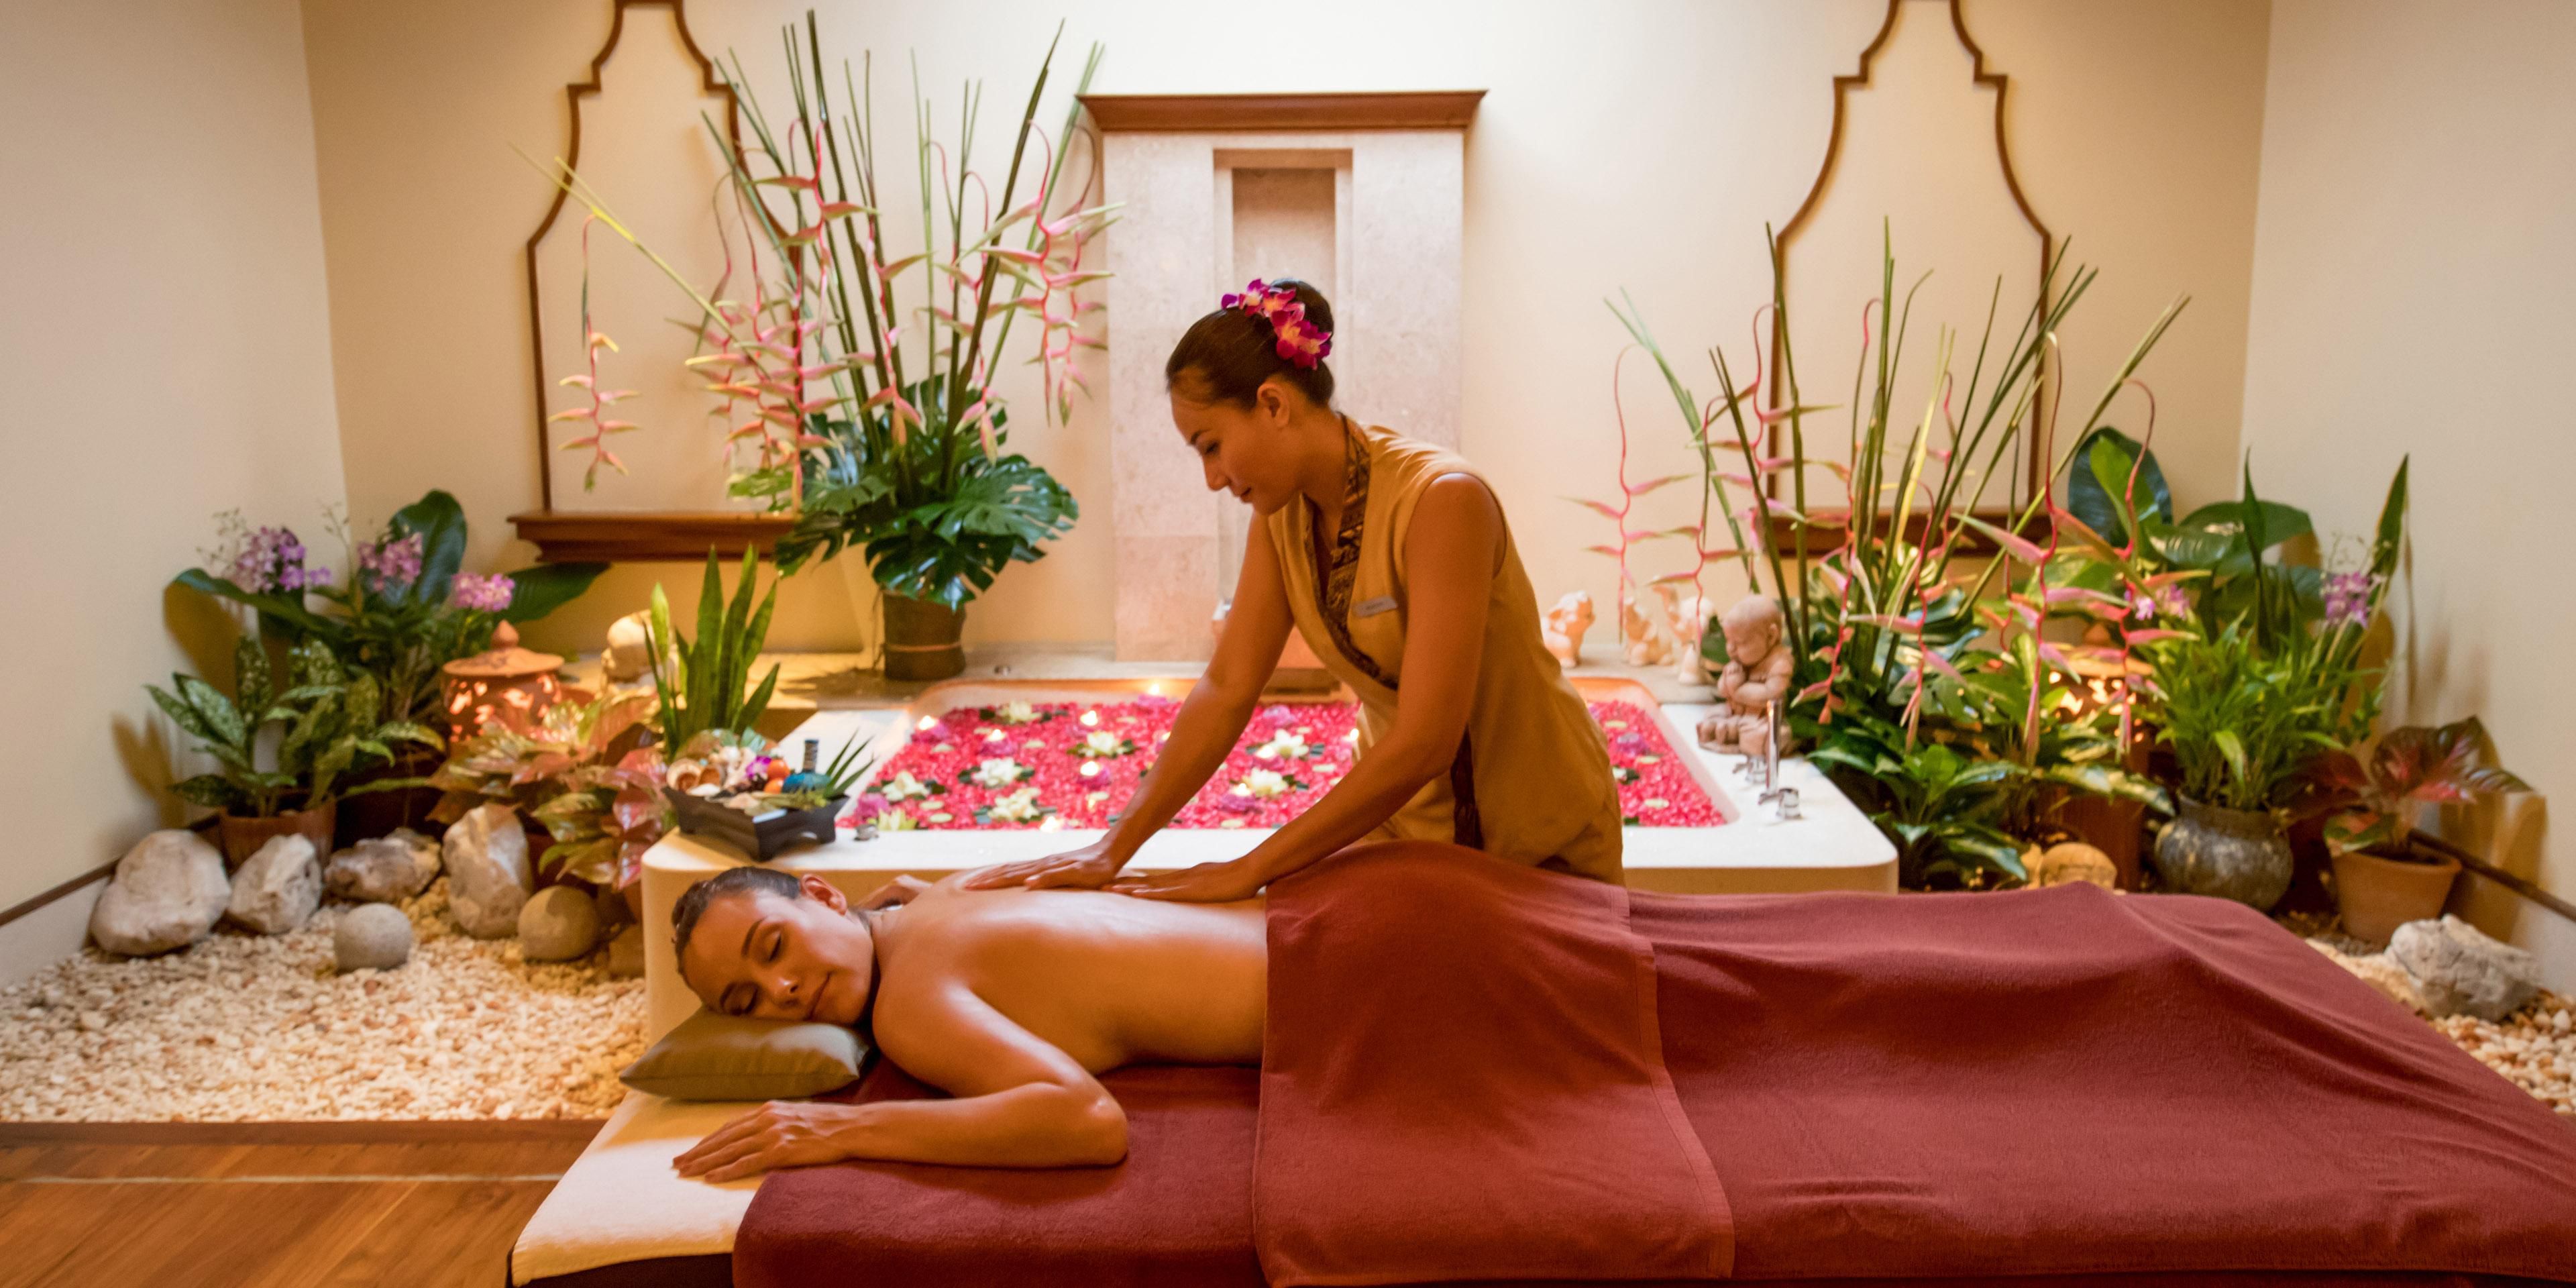 Featuring organic botanicals for facial and body treatments, relax at Amburaya Spa’s six private suites, perfect for couples and individuals alike. Enjoy signature treatments from our experienced masseuses, including the Amburaya Embrace – a full-body massage that features the combination of five massage therapies for a truly relaxing experience.